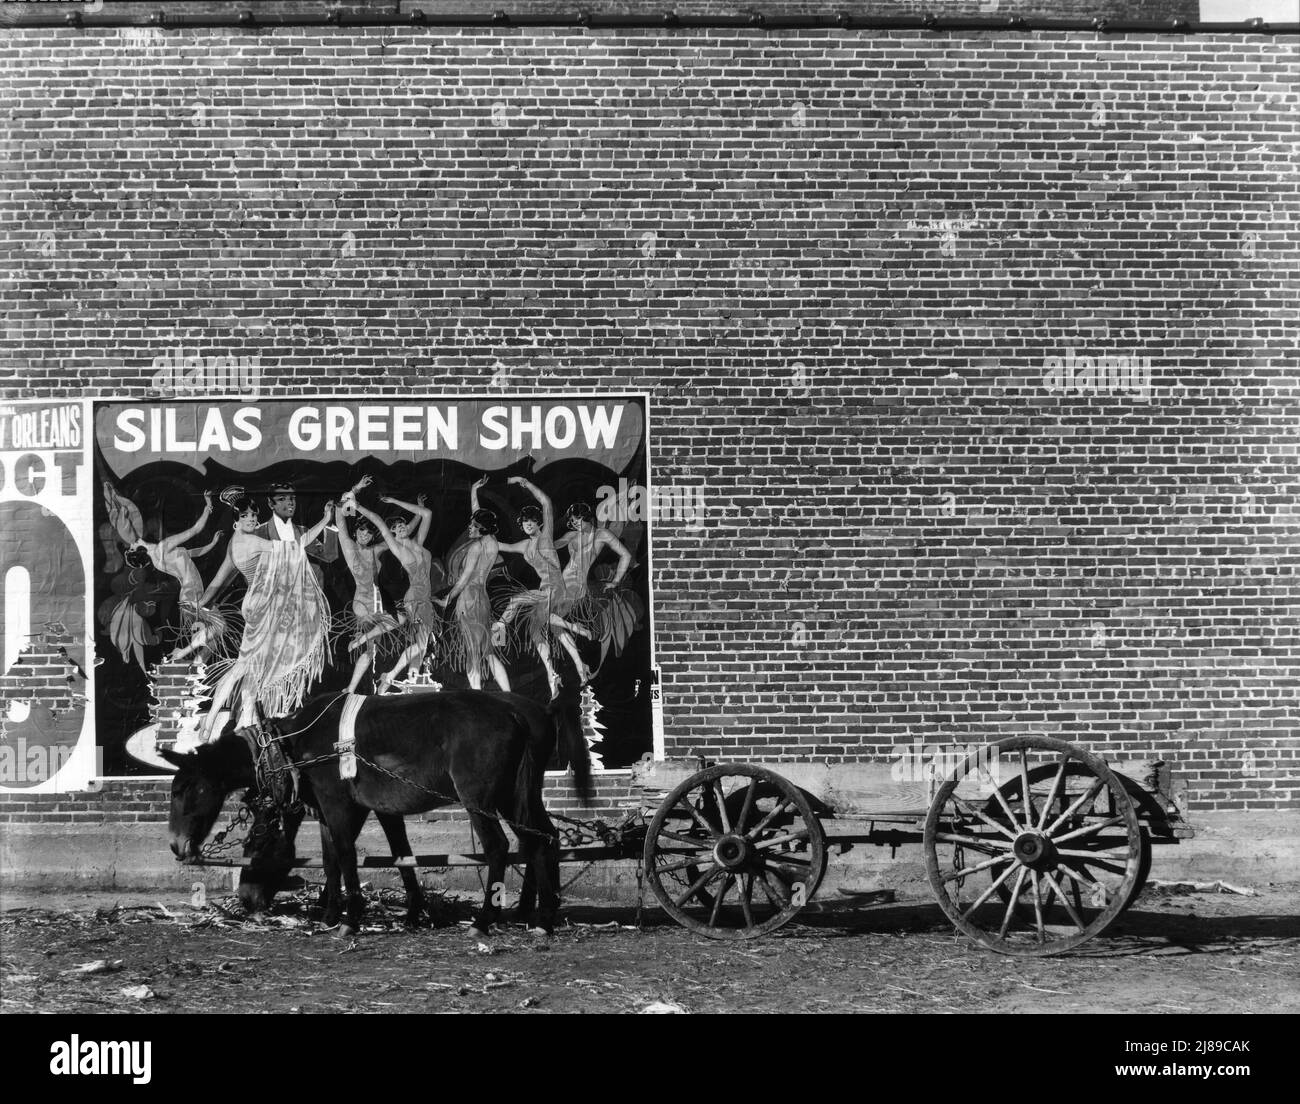 Minstrel poster in Alabama town. ['Silas Green Show'. Silas Green from New Orleans was a touring show - part revue, part musicomedy, part minstrel show - which portrayed black people in a stereotypical manner now considered offensive]. Stock Photo